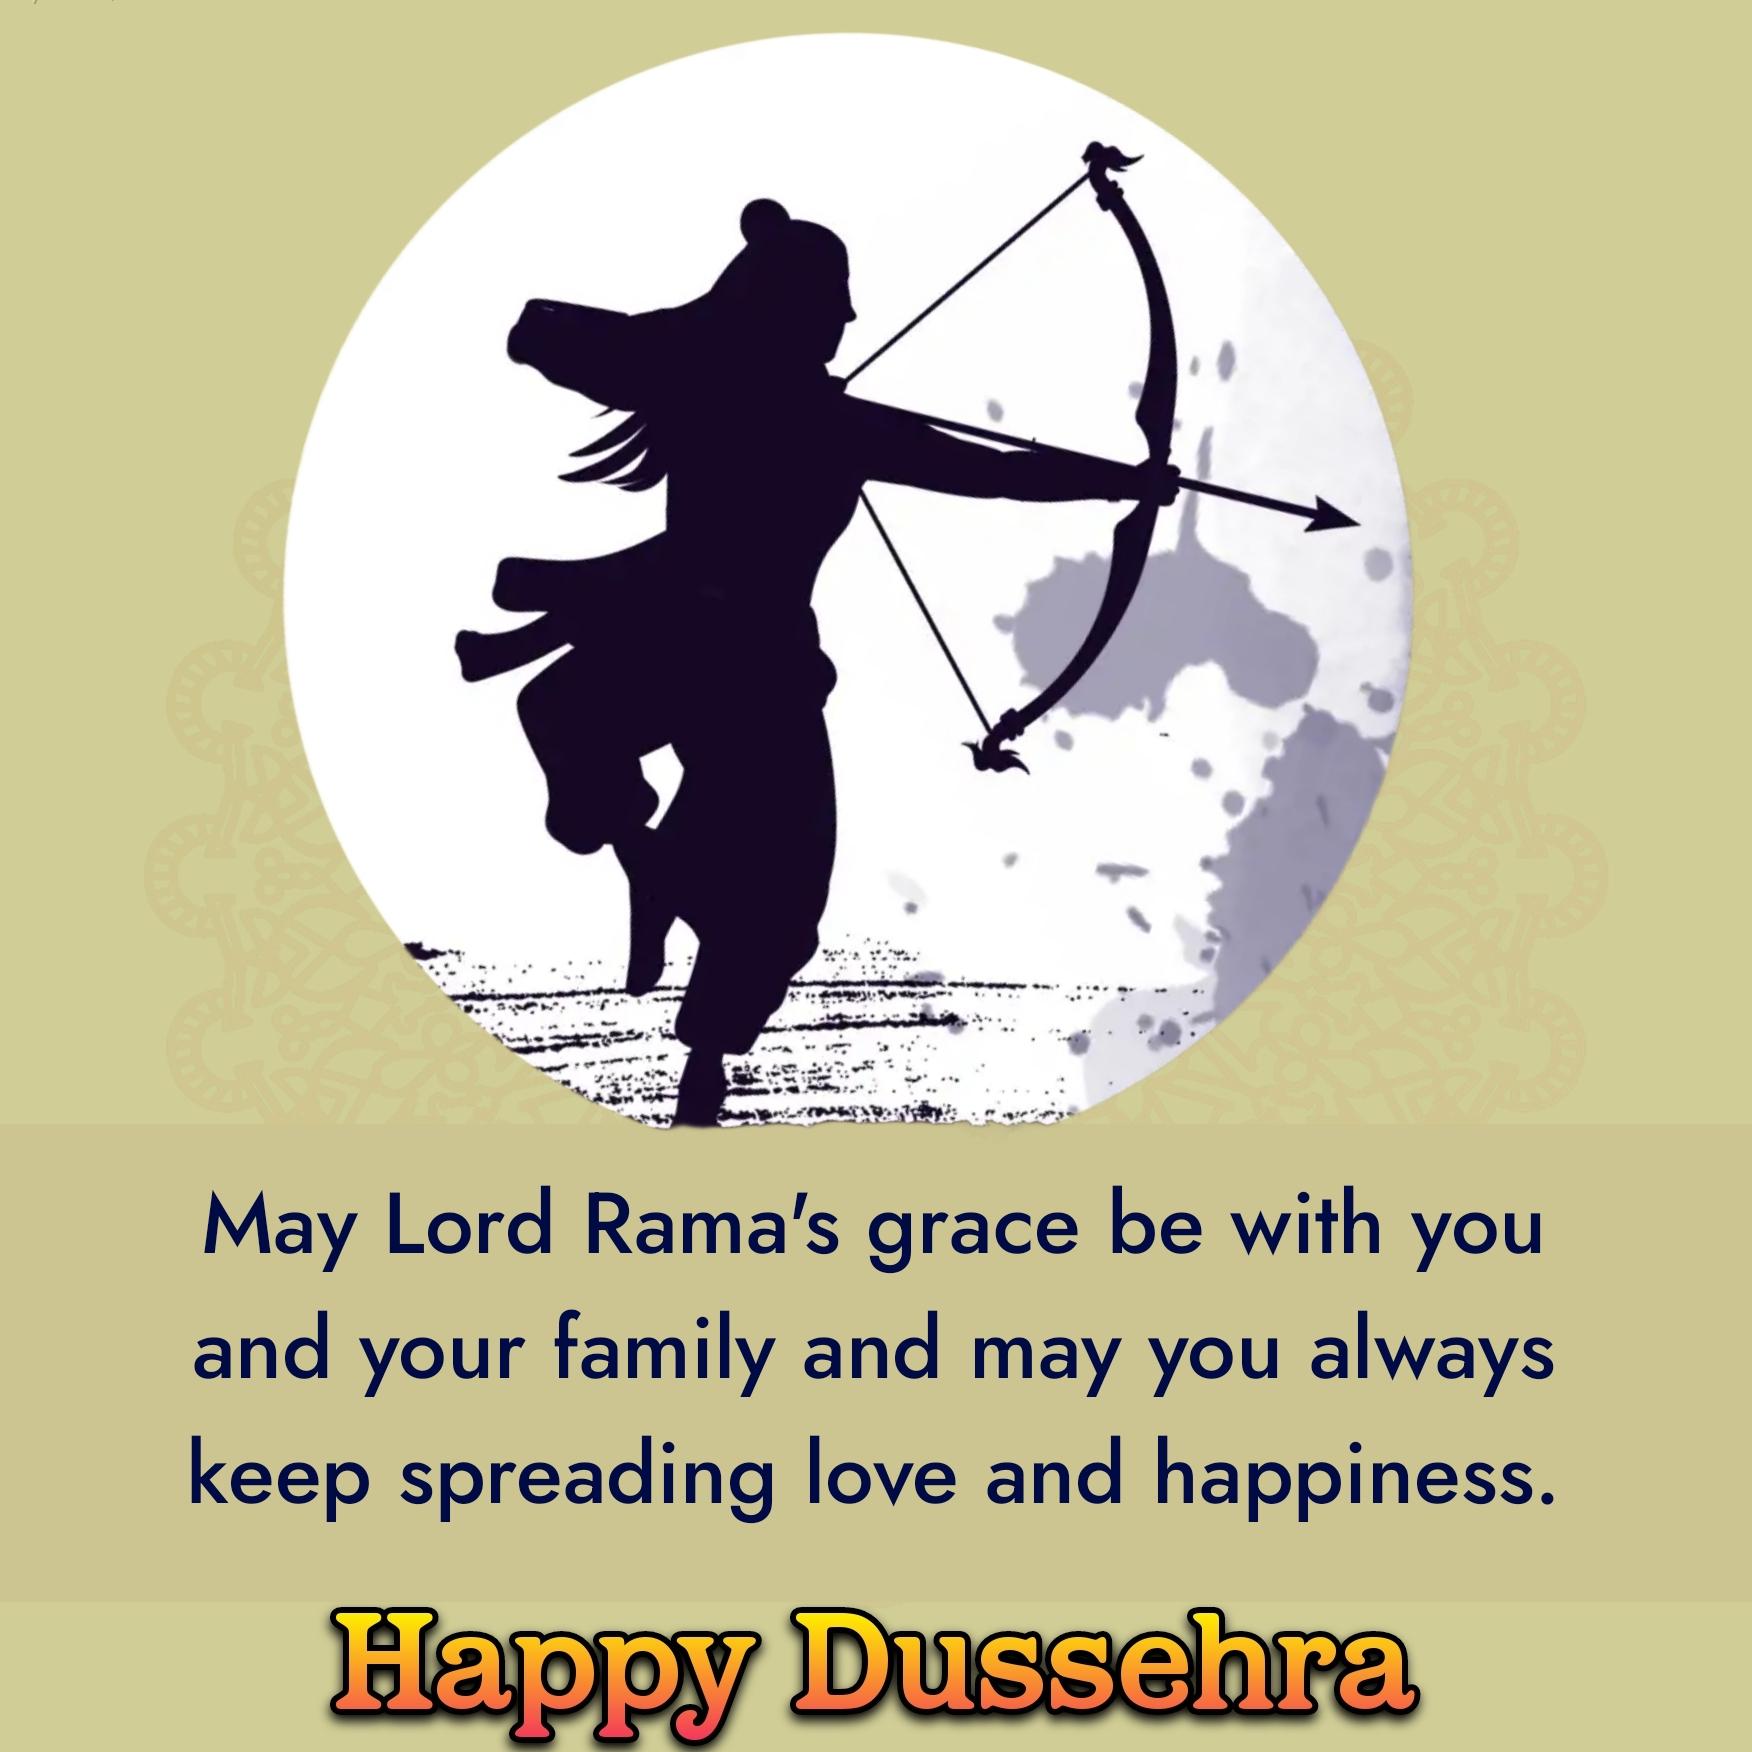 May Lord Rama's grace be with you and your family